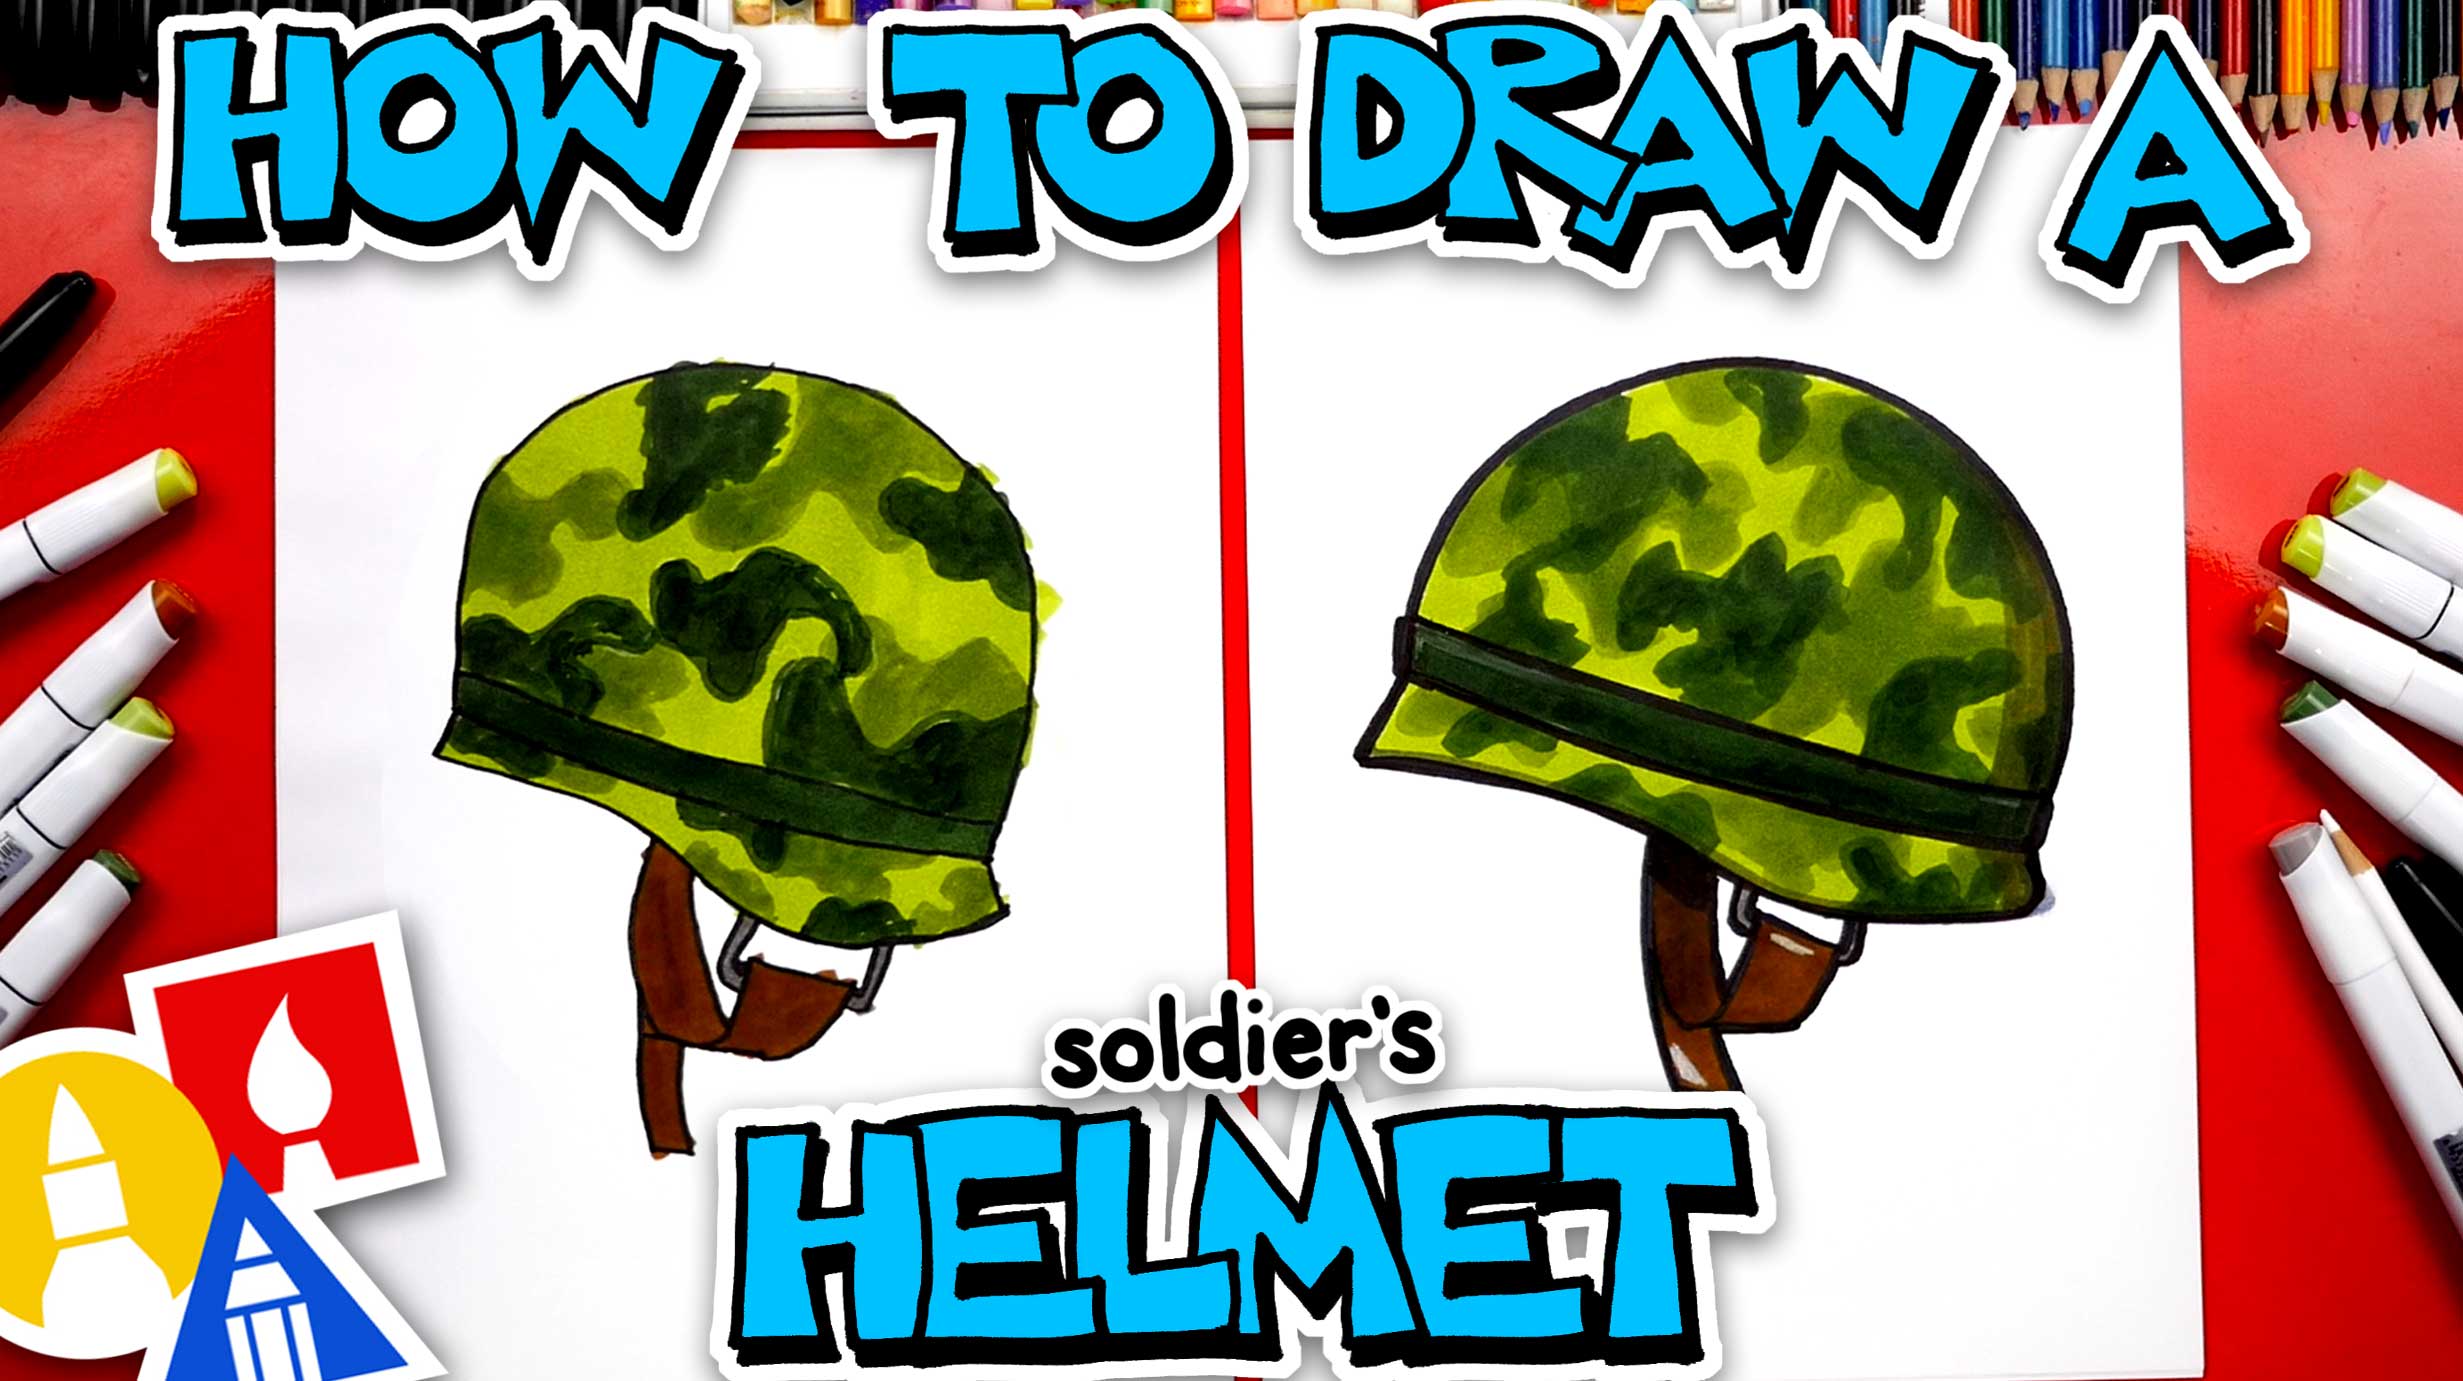 How To Draw A Soldier s Helmet Art For Kids Hub